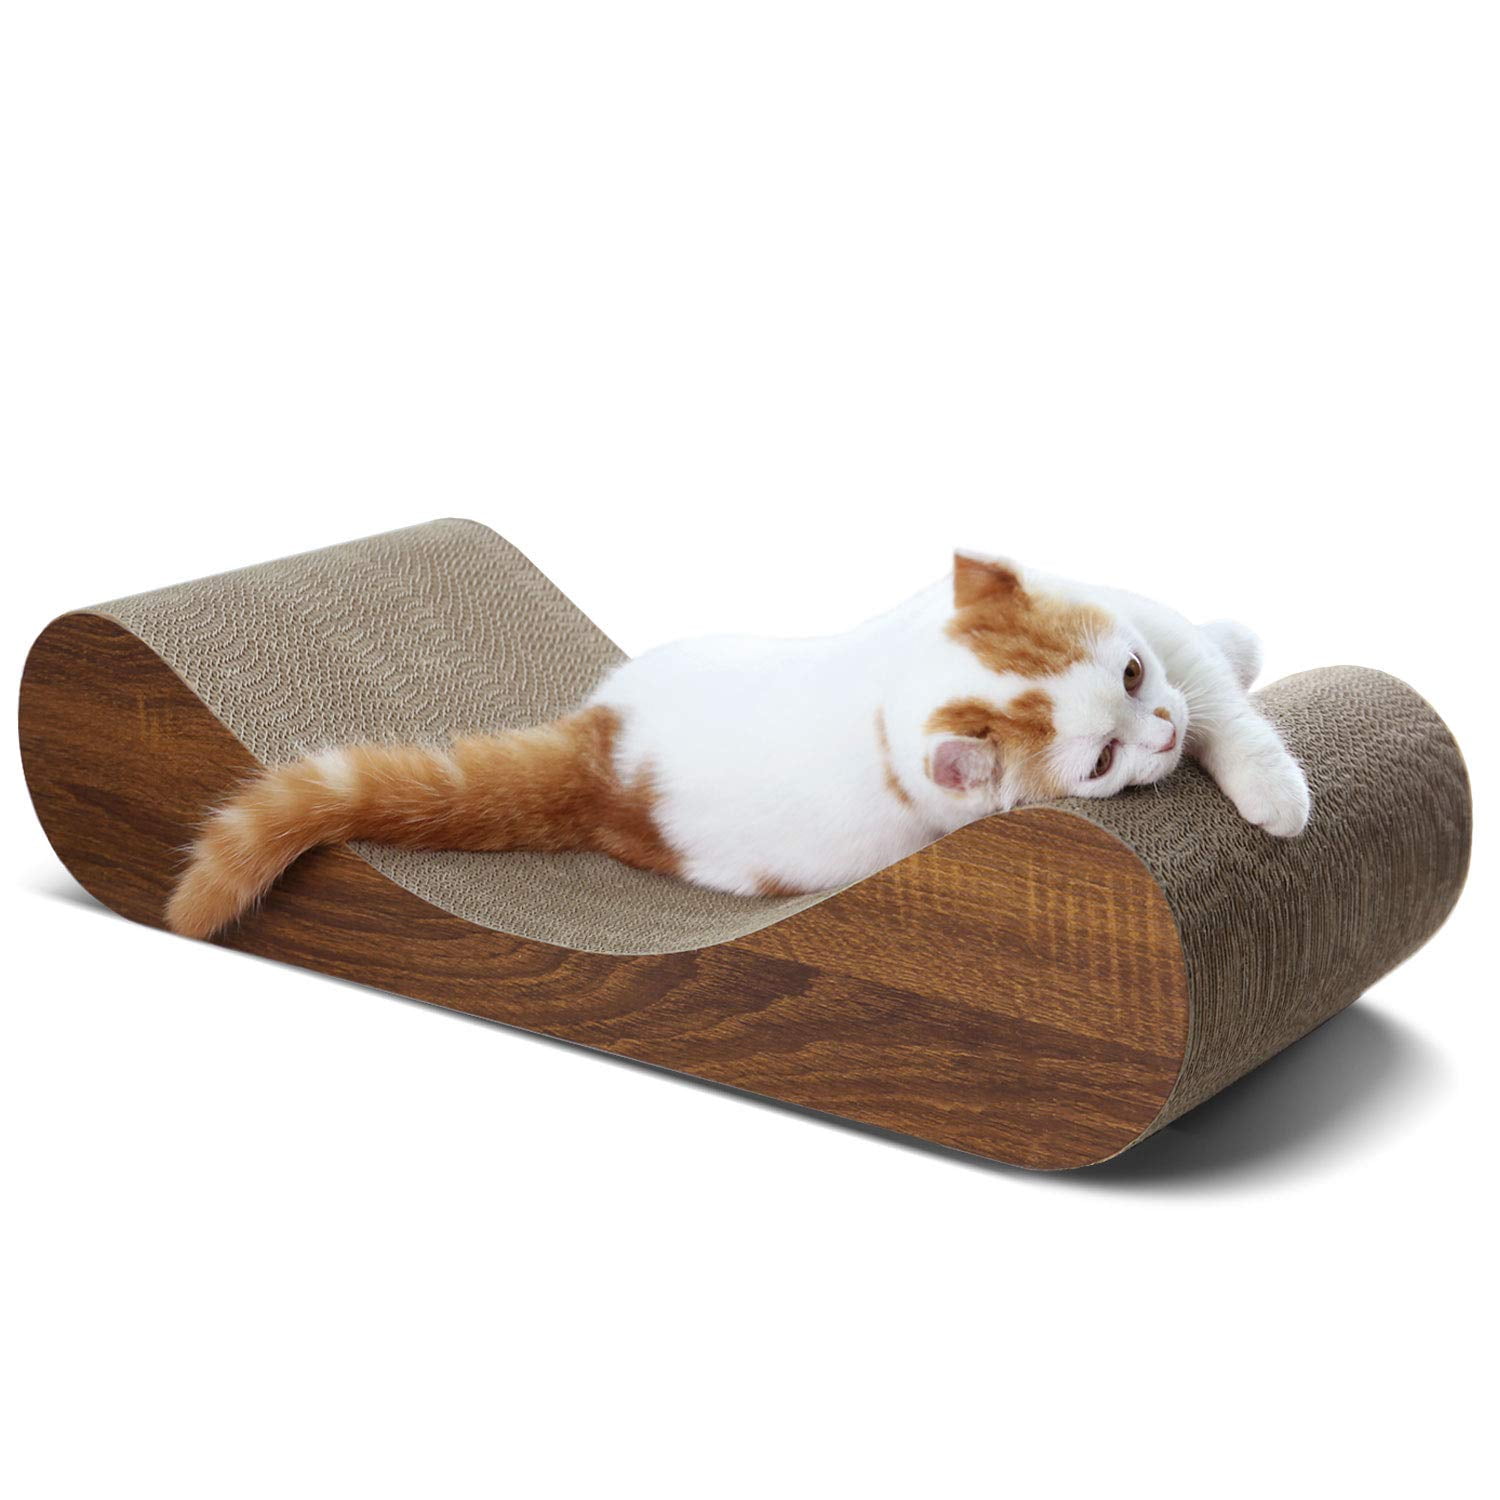 Cat Scratcher Cardboard,Reversible,Durable Recyclable Cardboard Suitable for Cats to Rest 4 Packs in 1 Cat Scratch Pad Grind Claws and Play,Bone Shape Premium Scratch